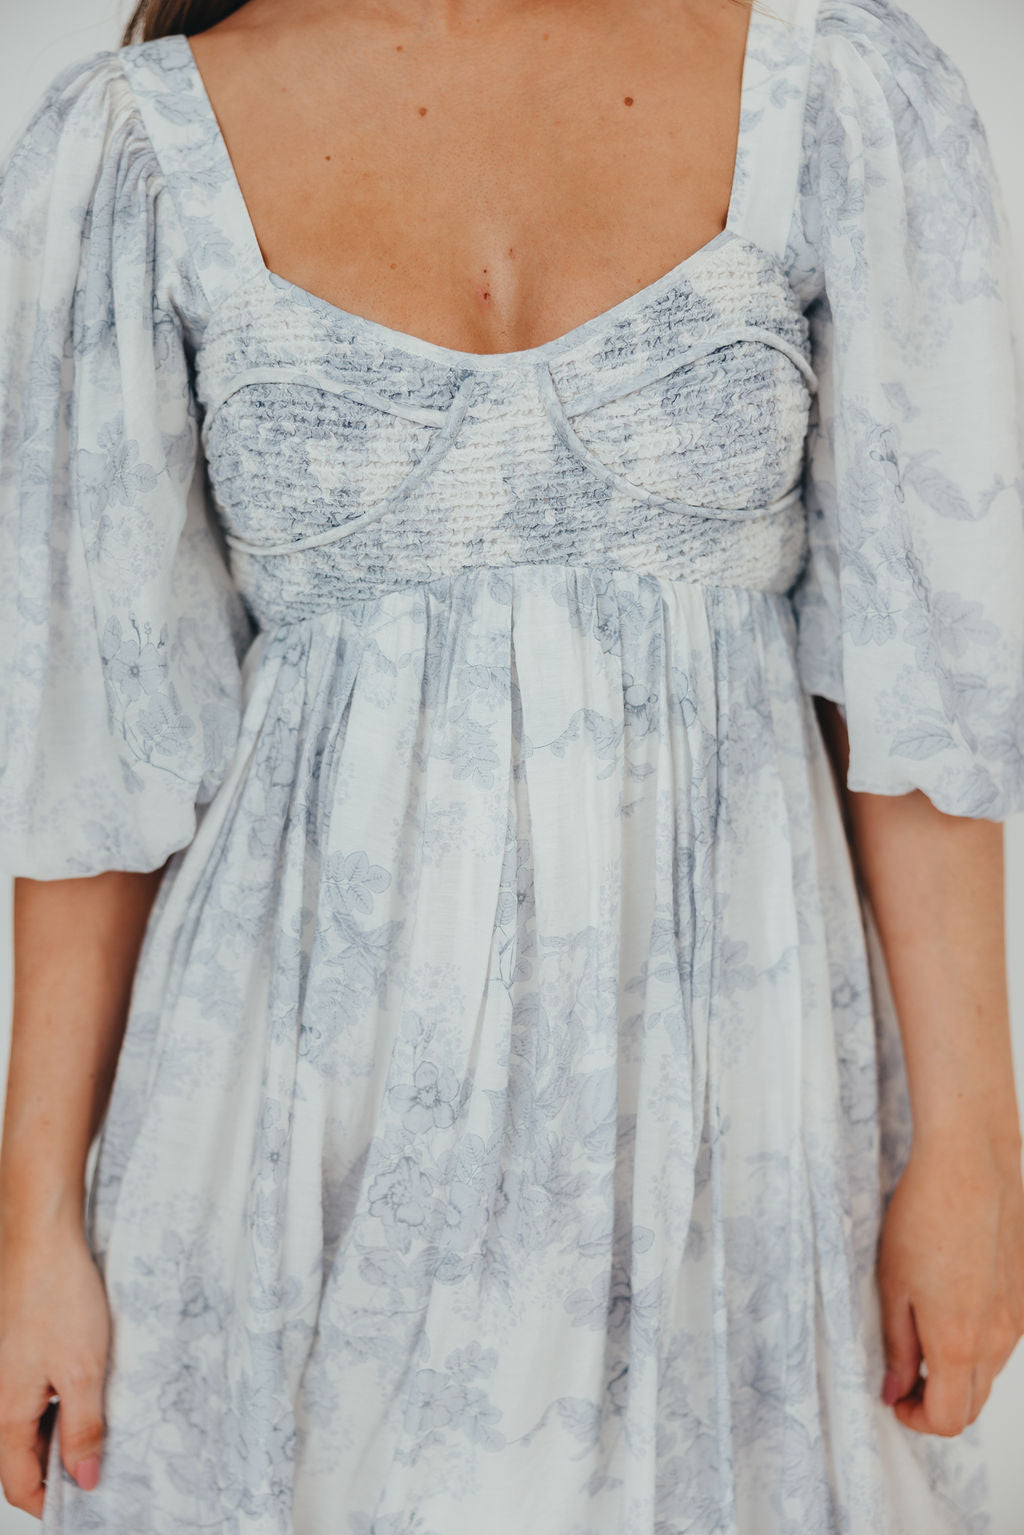 Harlow Maxi Dress in Light Blue Floral - Bump Friendly & Inclusive Sizing (S-3XL) - Low Stock